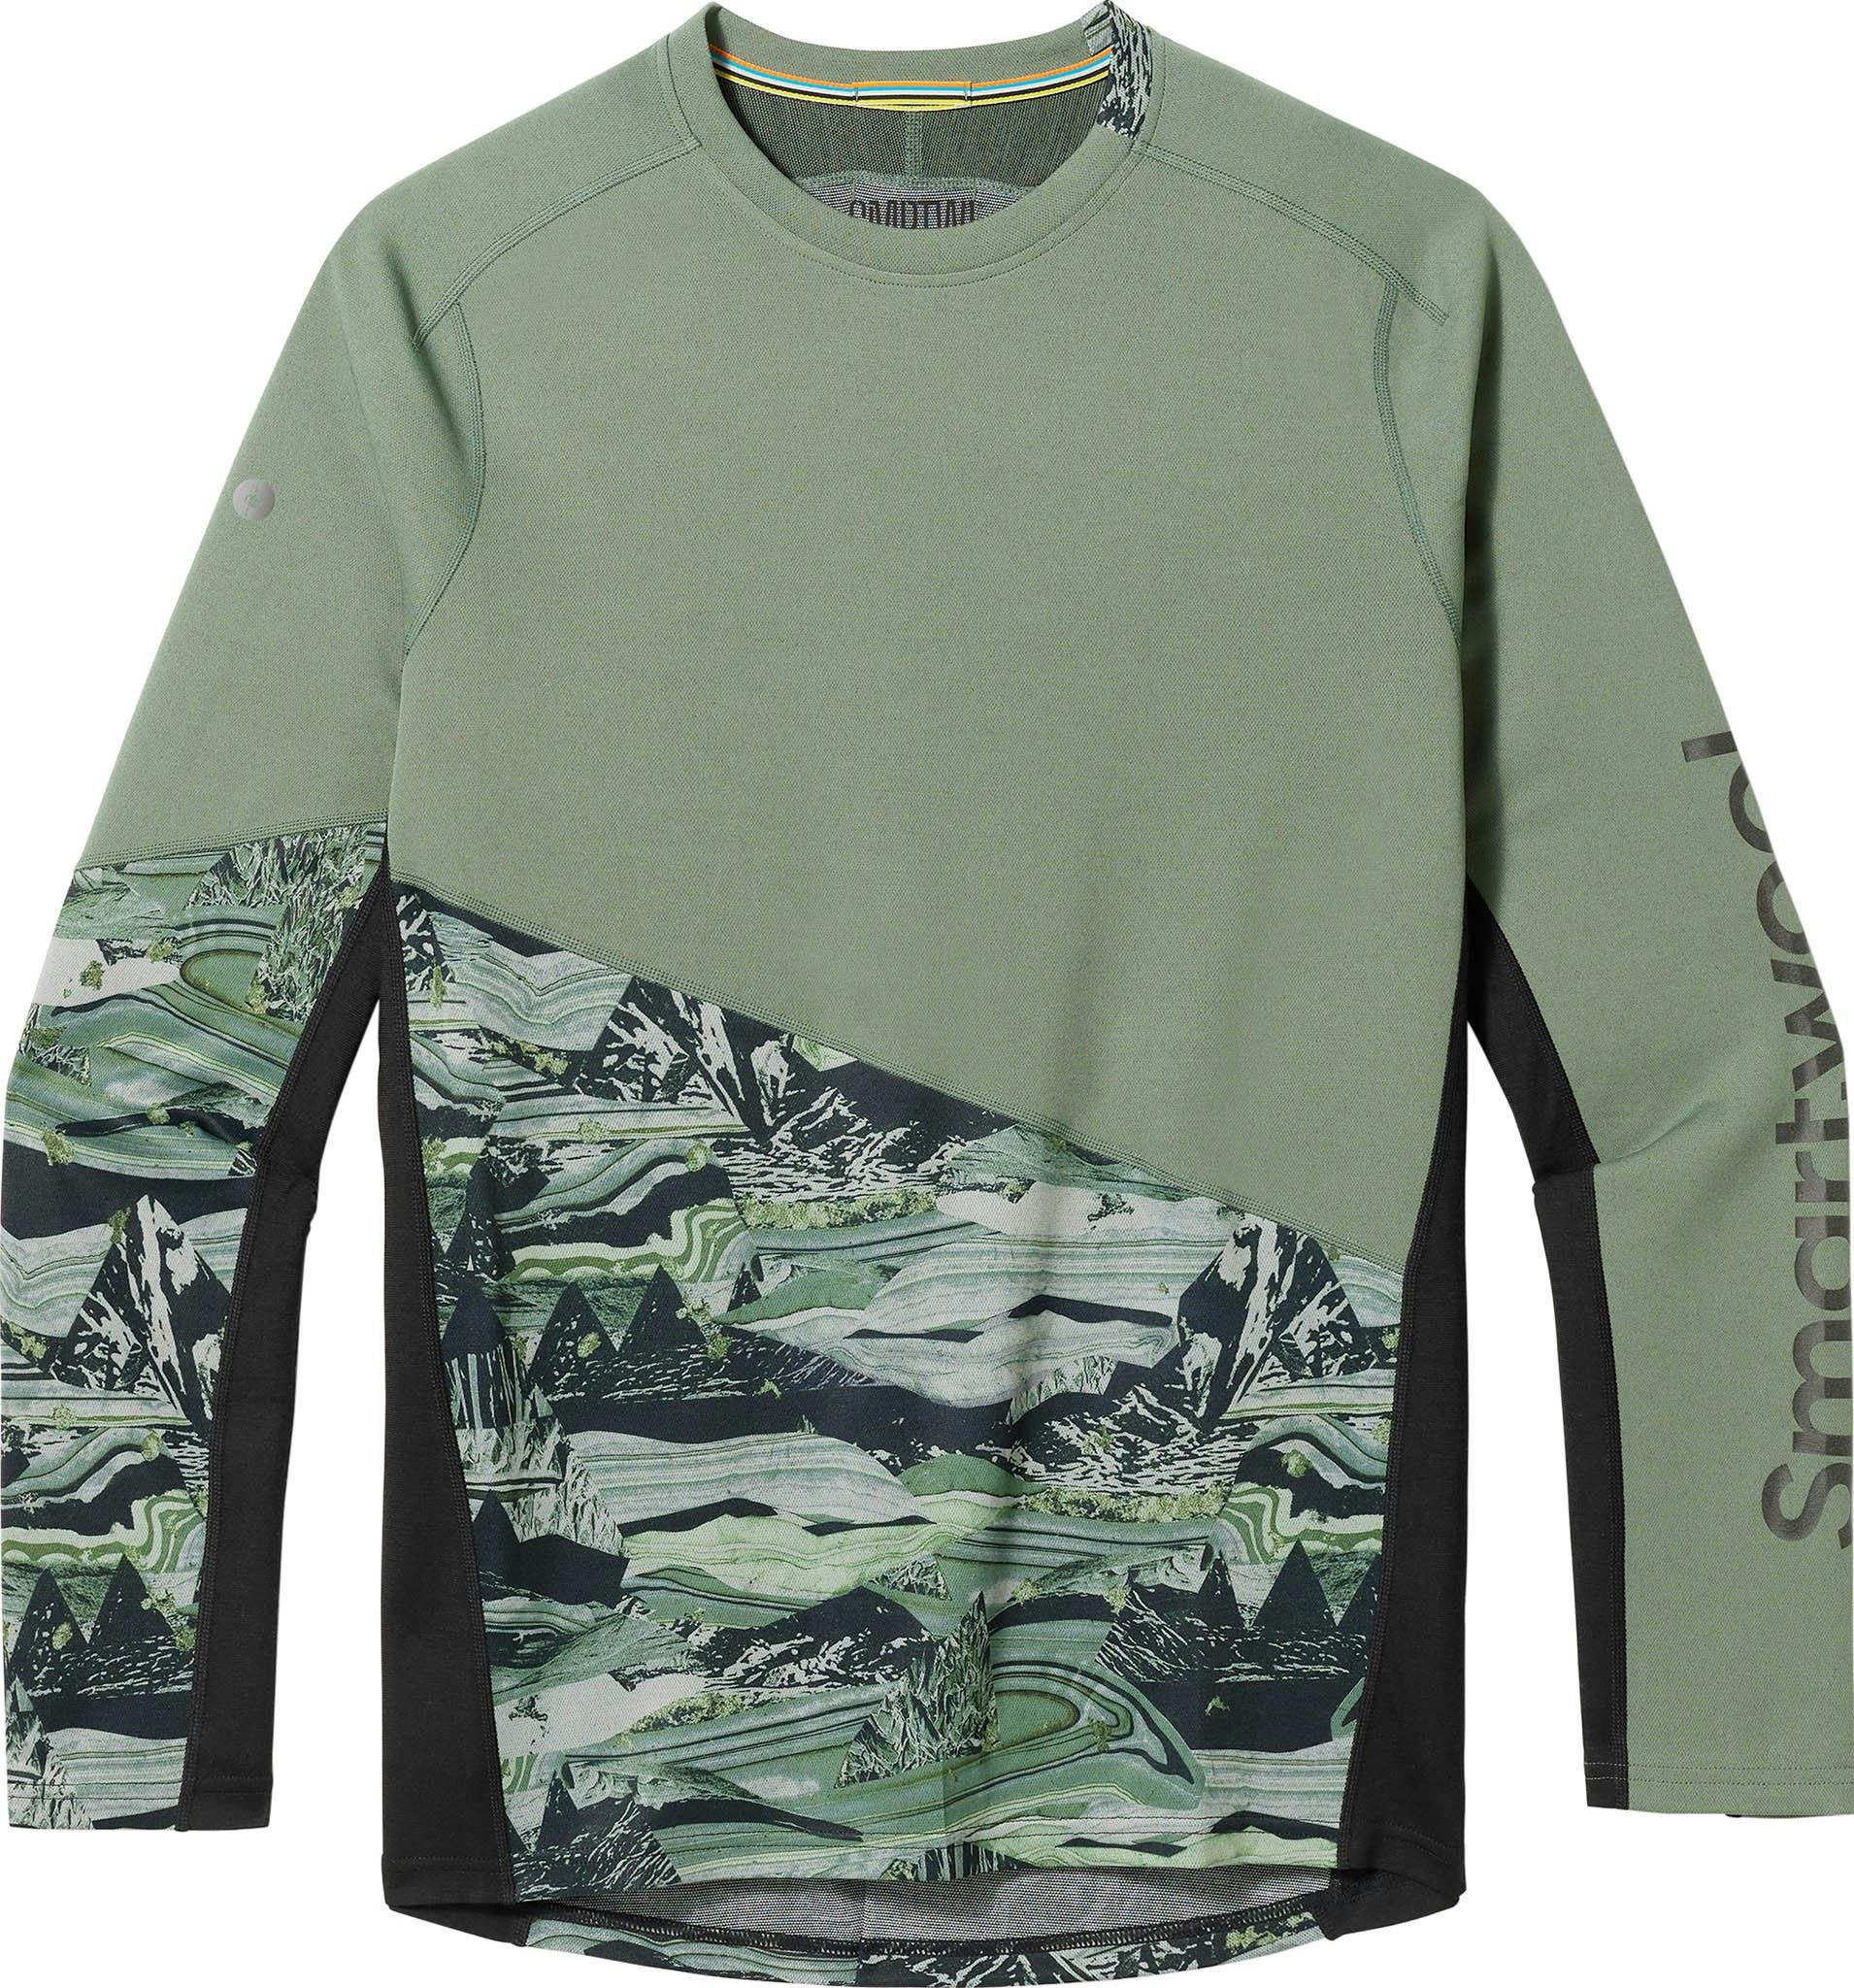 Product image for Mountain Bike Long Sleeve Jersey - Men's